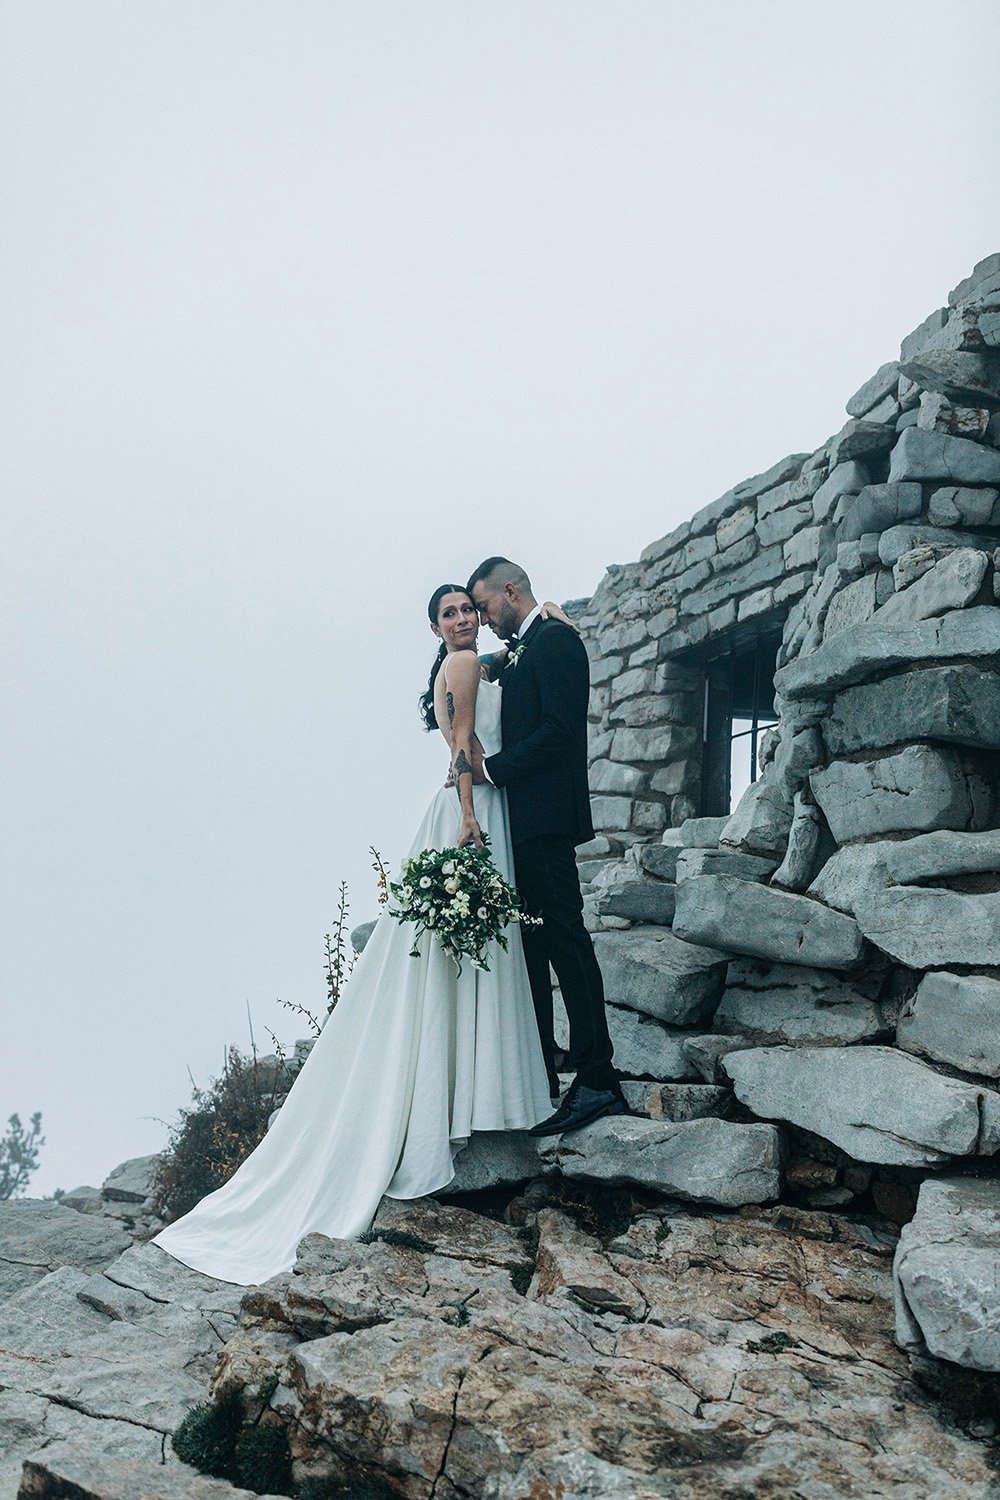 A couple cuddles on their wedding day by some ruins and a foggy view. 